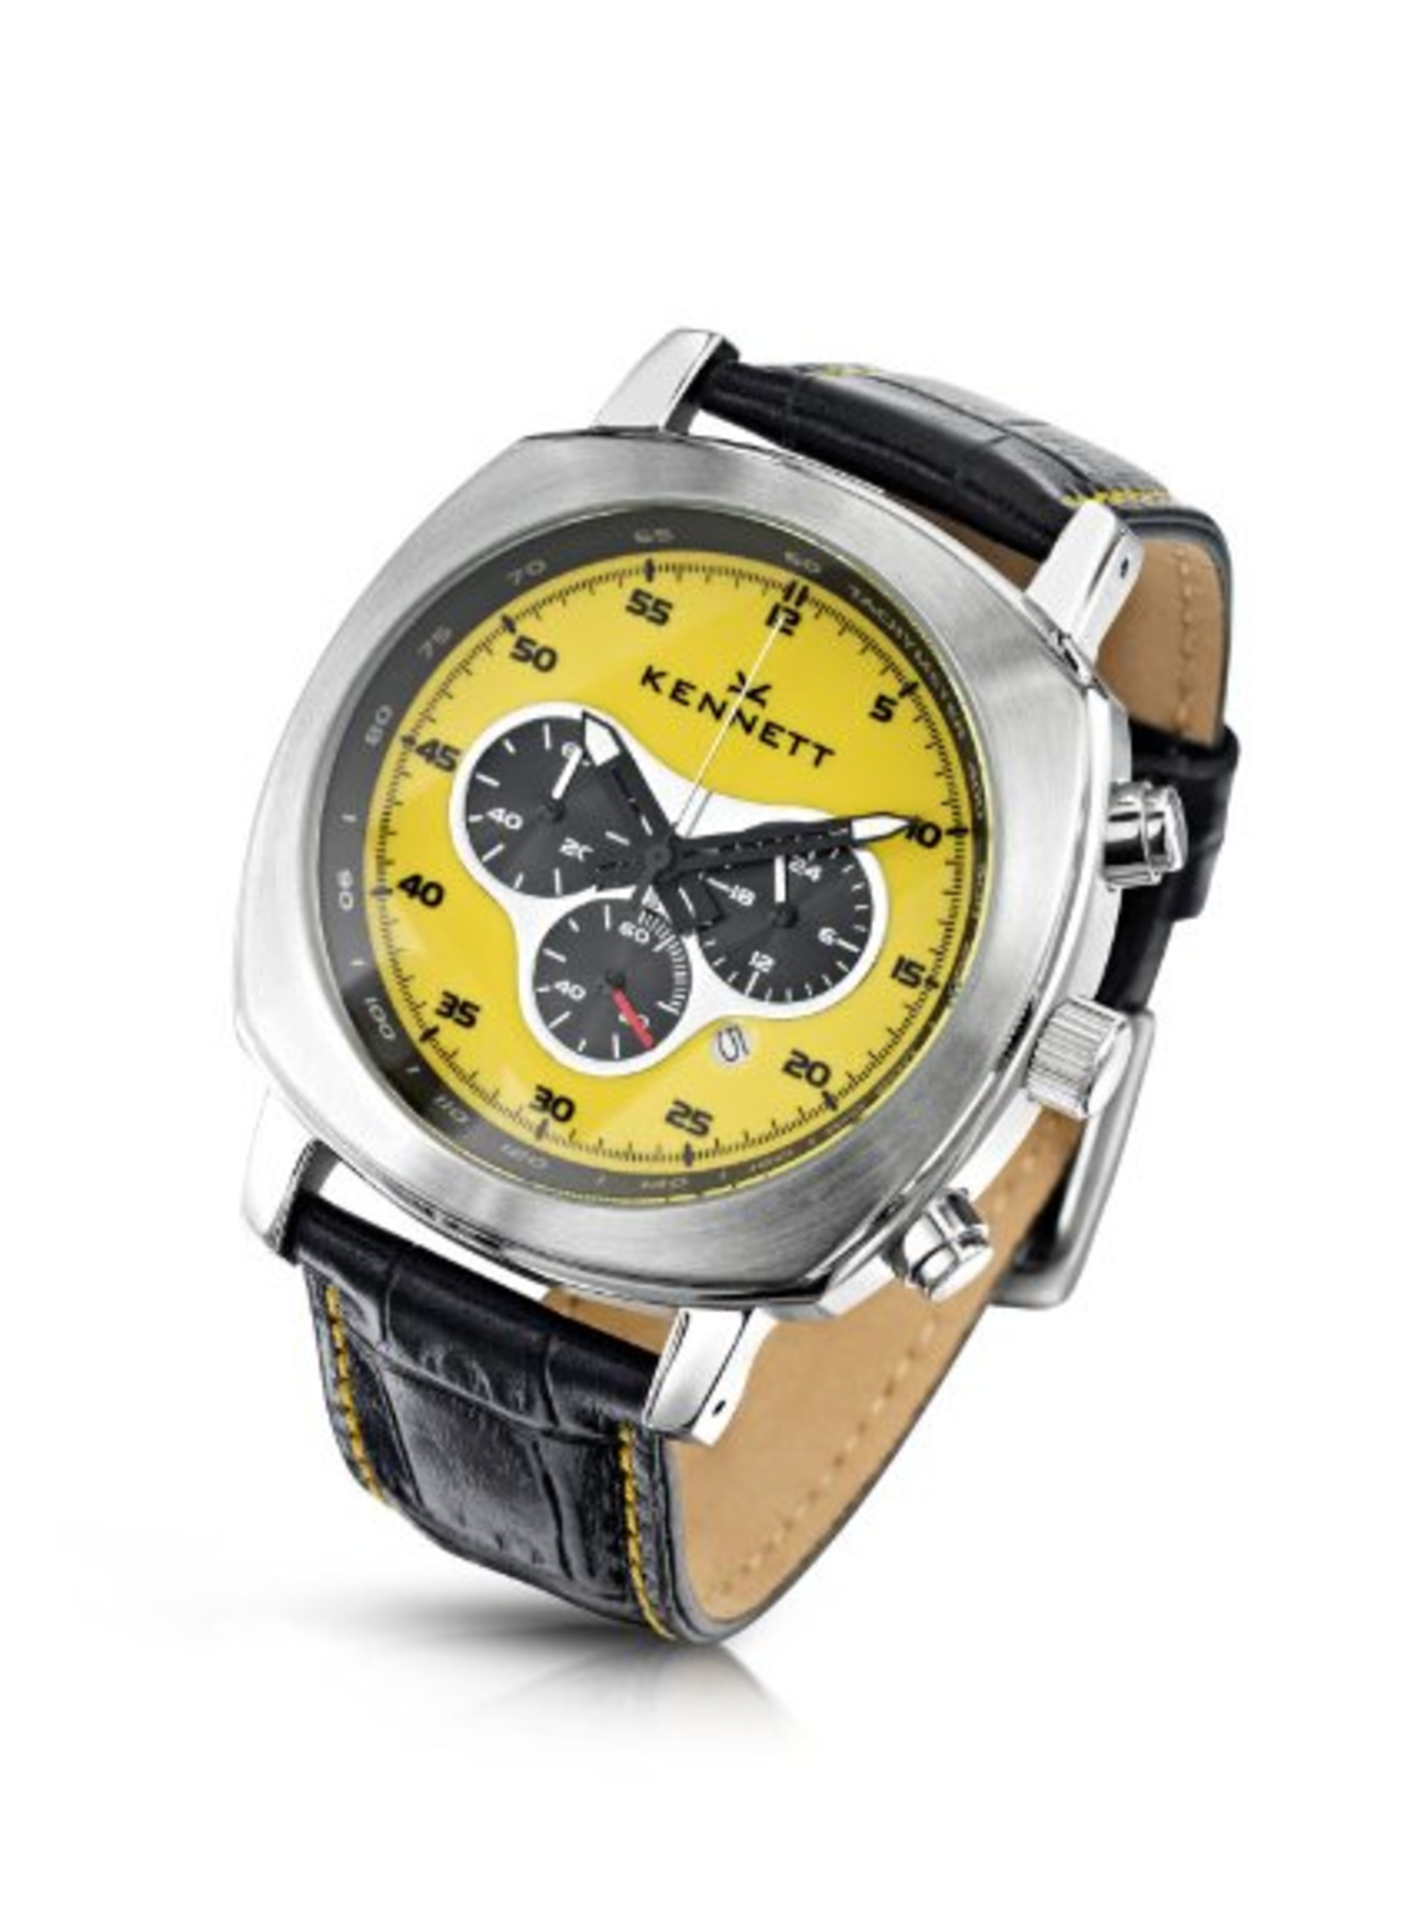 KENNETT Men's Quartz Watch with Yellow Dial Chronograph Display and Black Leather Strap 2001.4103